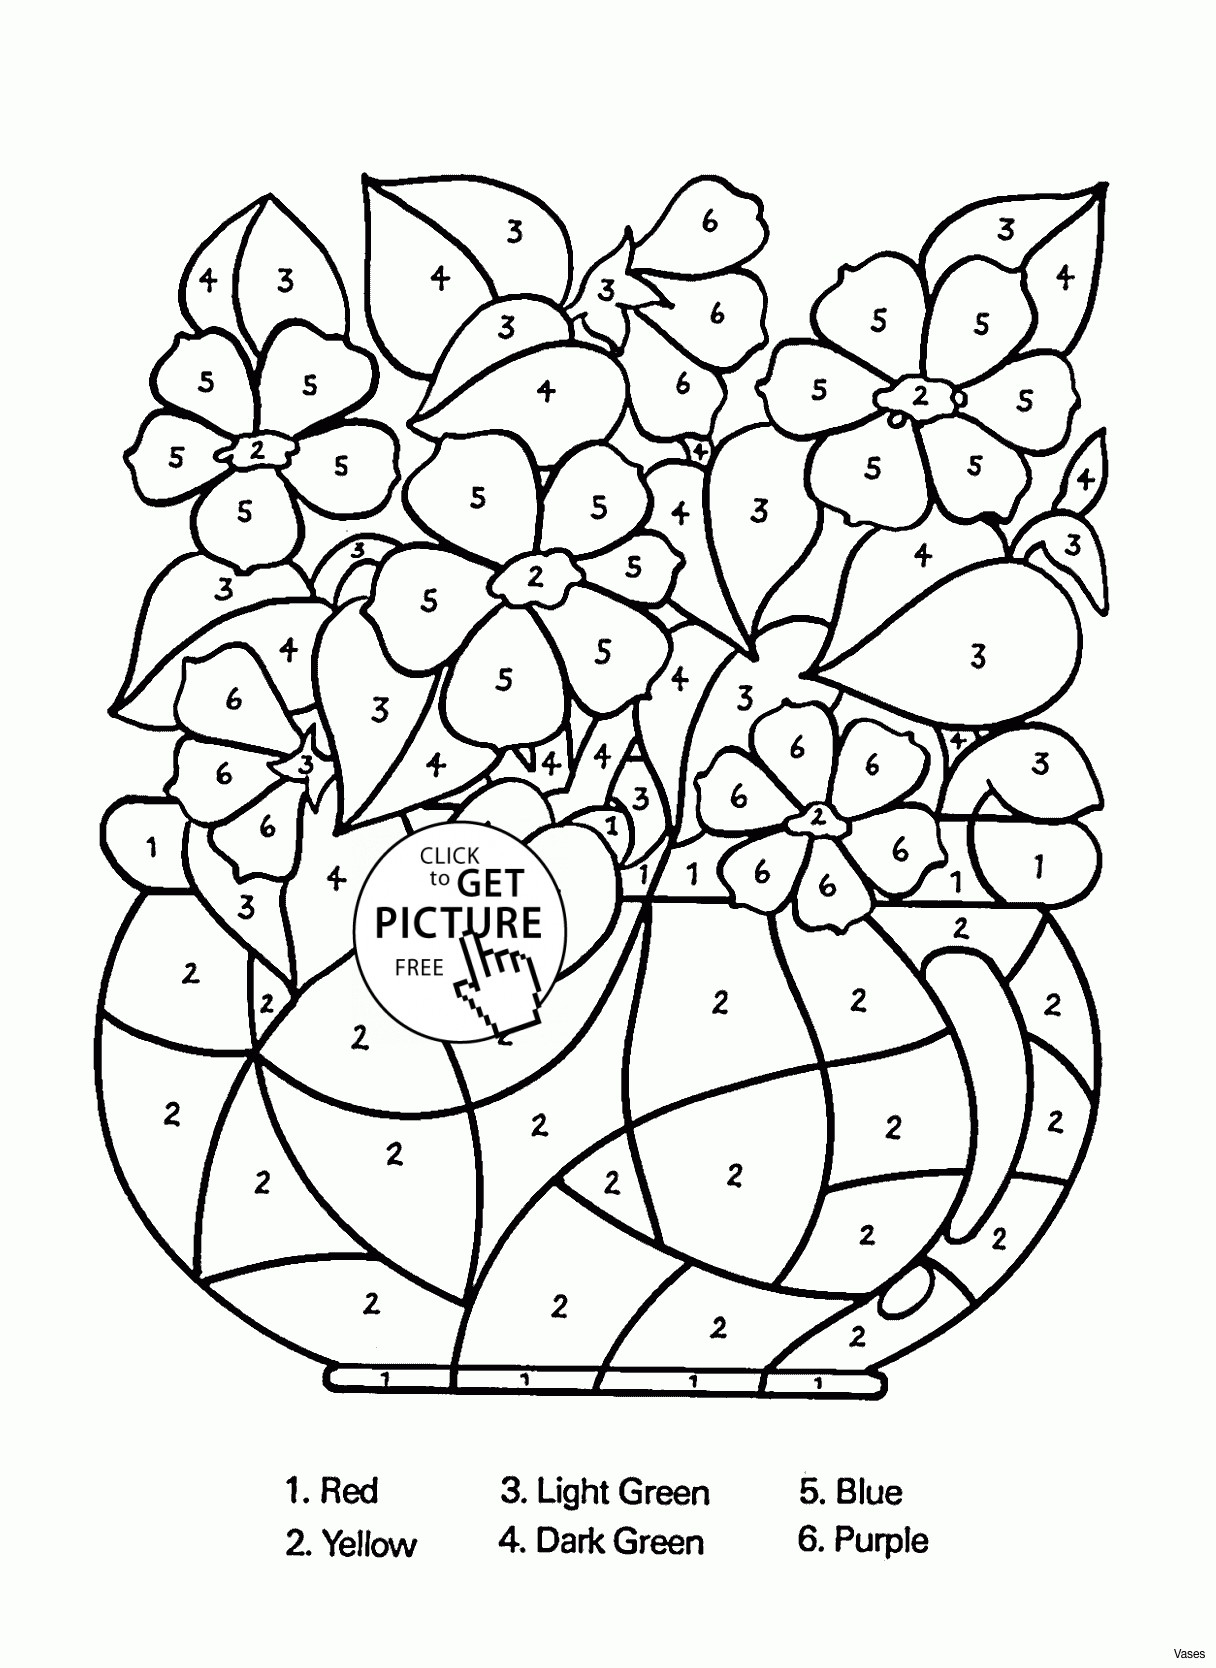 flower vase food of jamaica coloring pages throughout jamaica coloring pages luxury cool vases flower vase coloring page pages flowers in a top i 0d of jamaica coloring pages